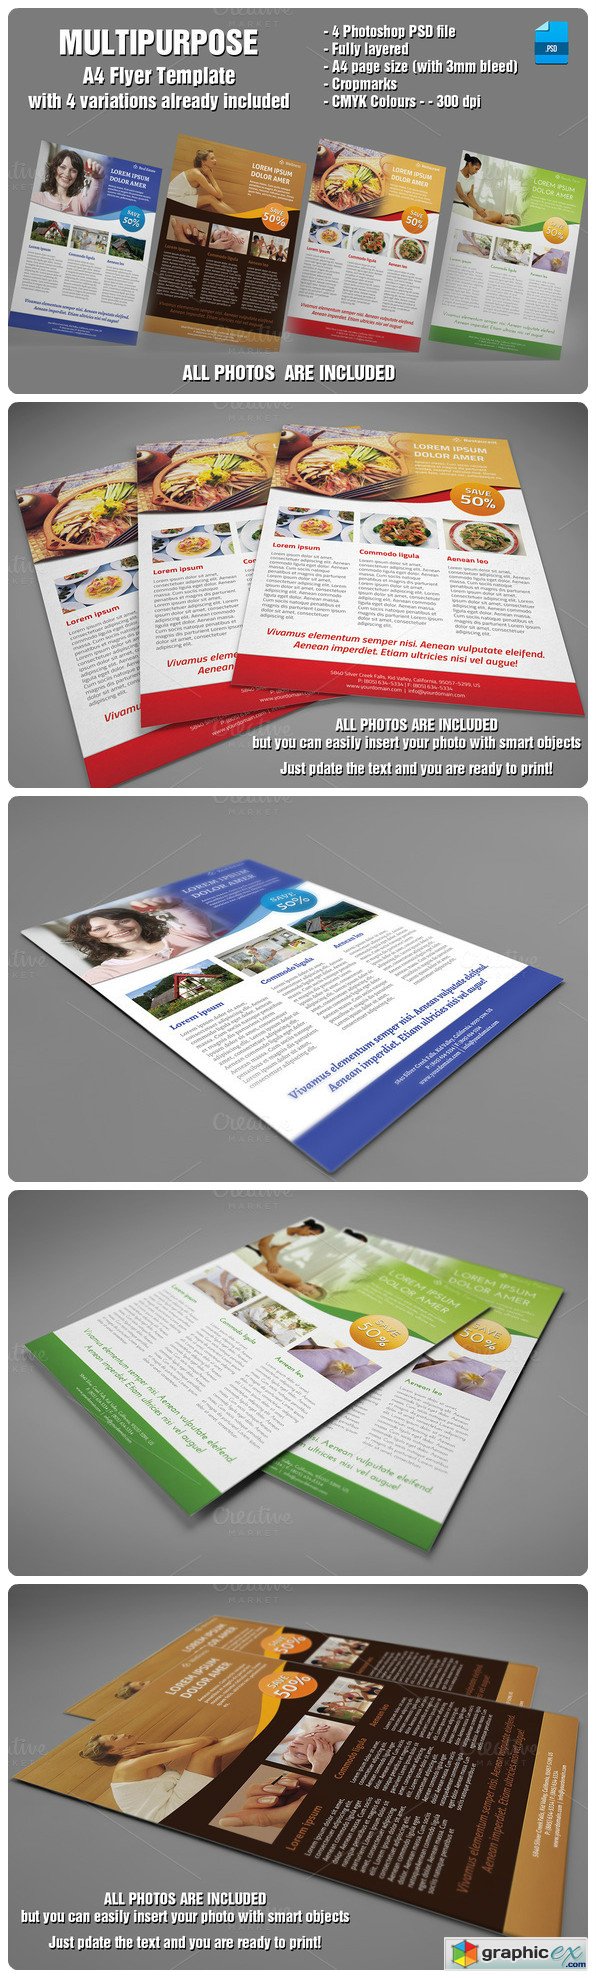 Multipurpose Flyer with 4 variations